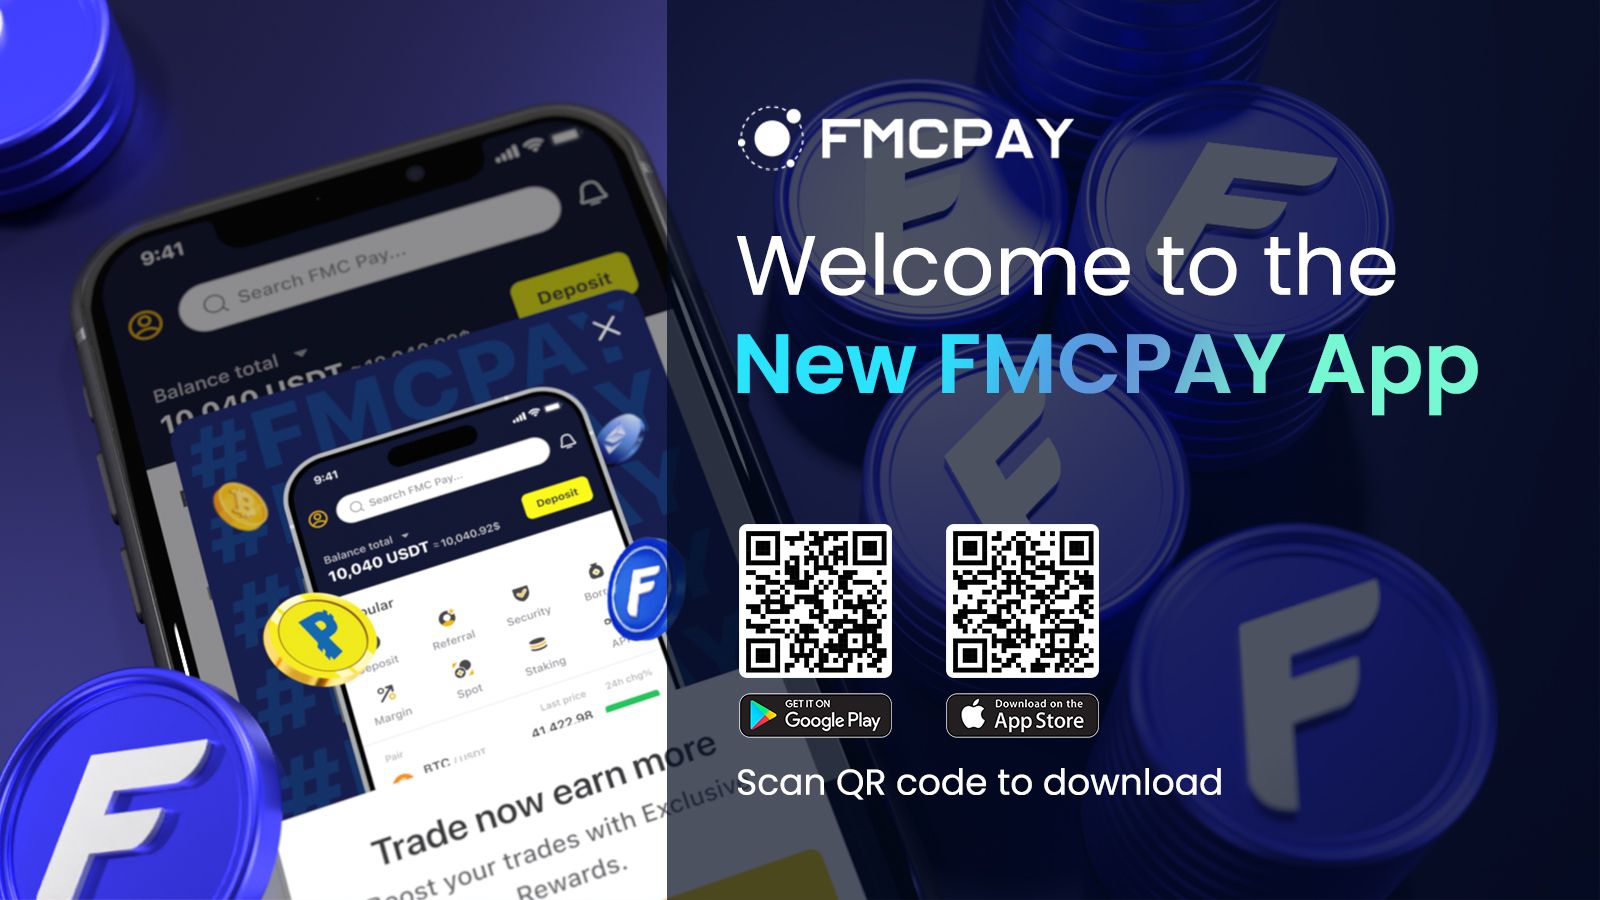 fmcpay revolution the new app launching